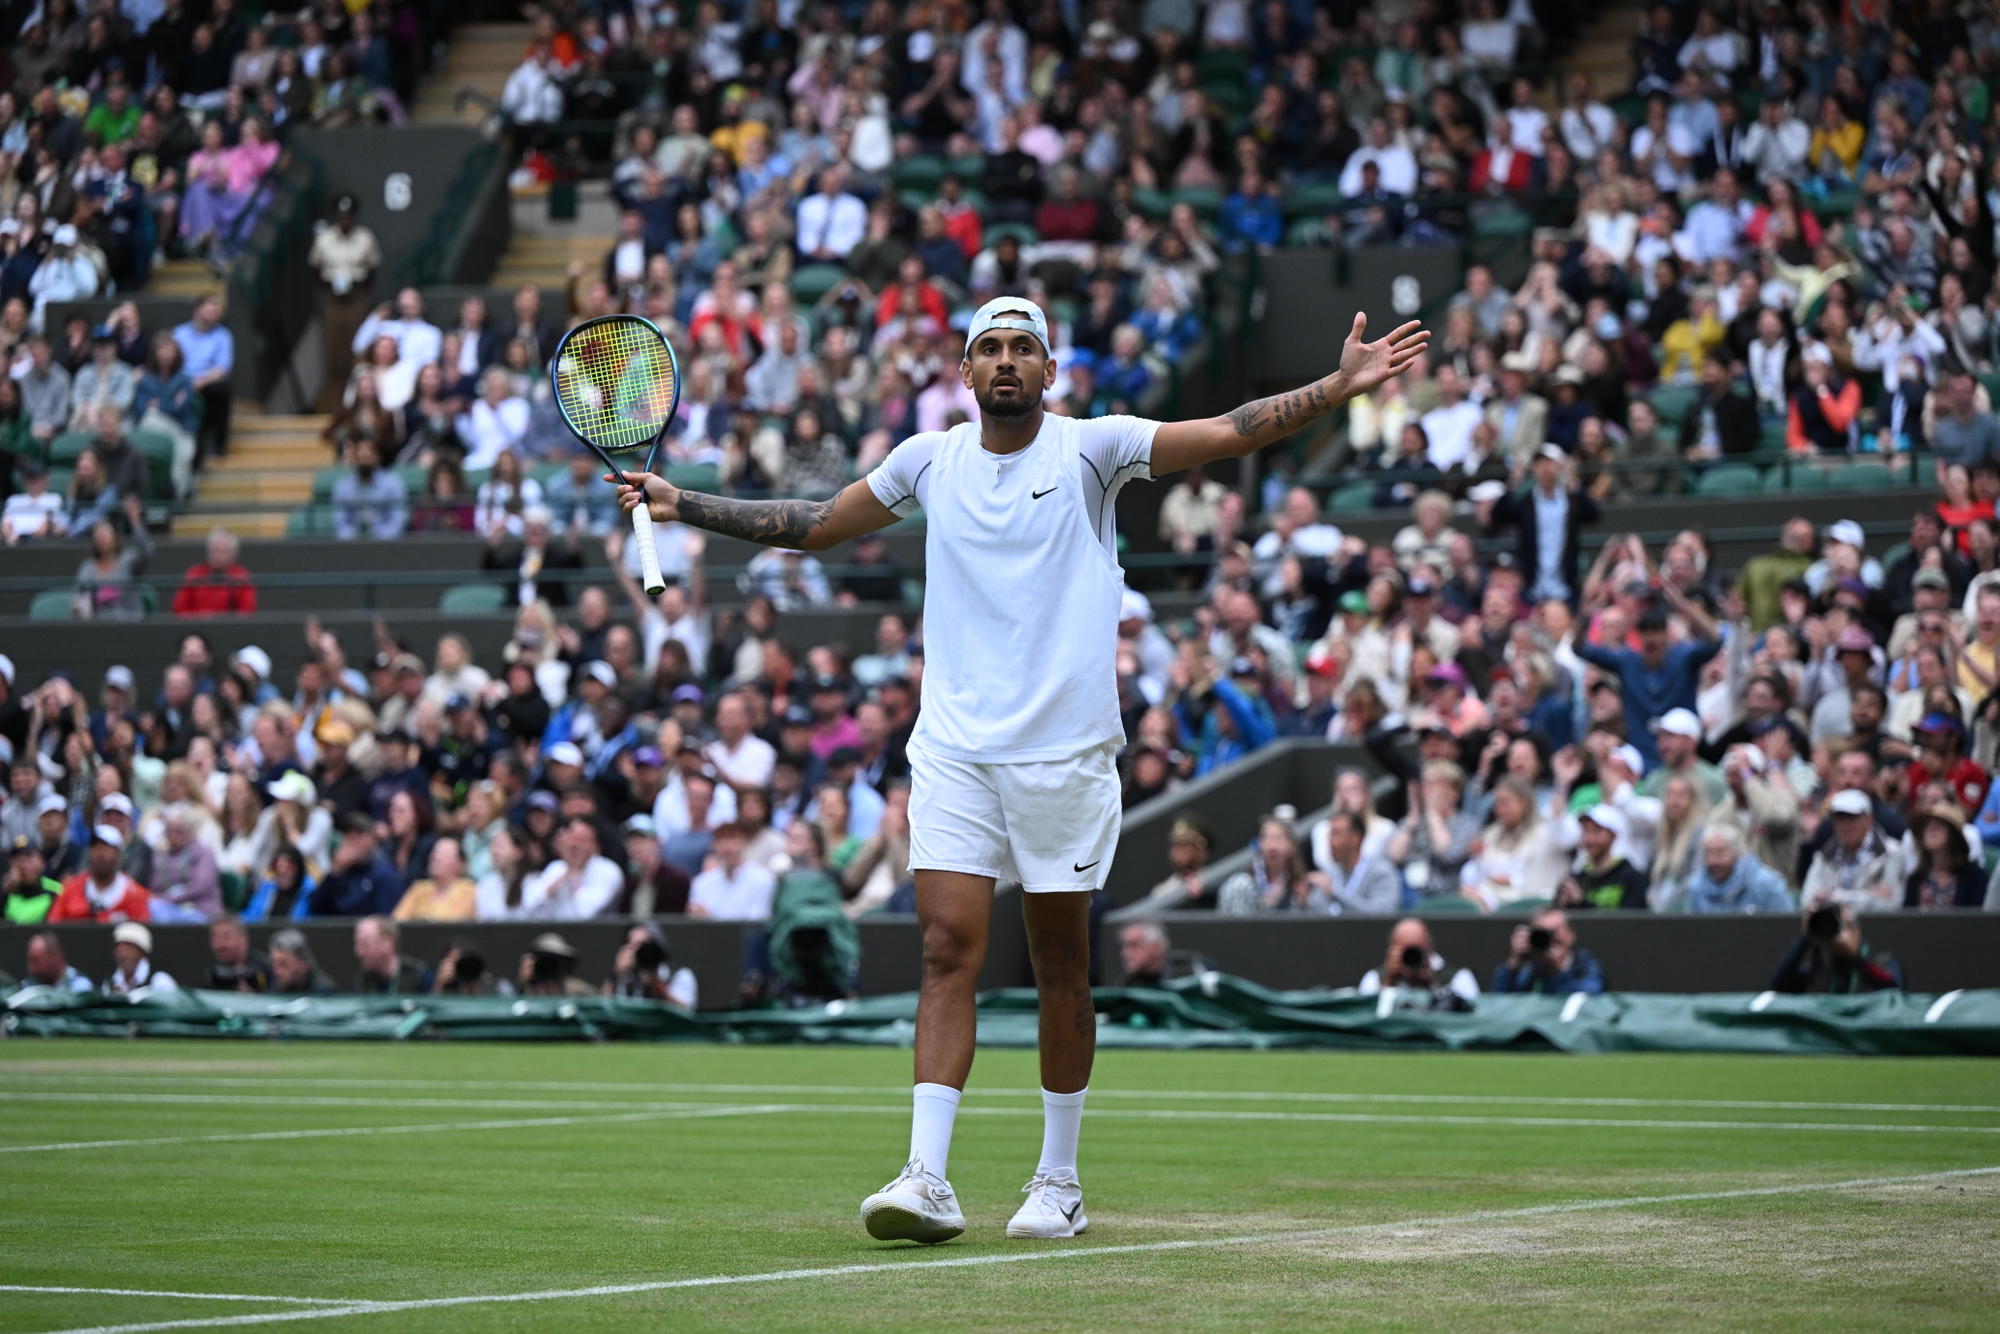 Wimbledon 2022 LIVE: Nick Kyrgios brushes past Stefanos Tsitsipas in a four-set thriller to advance to fourth round